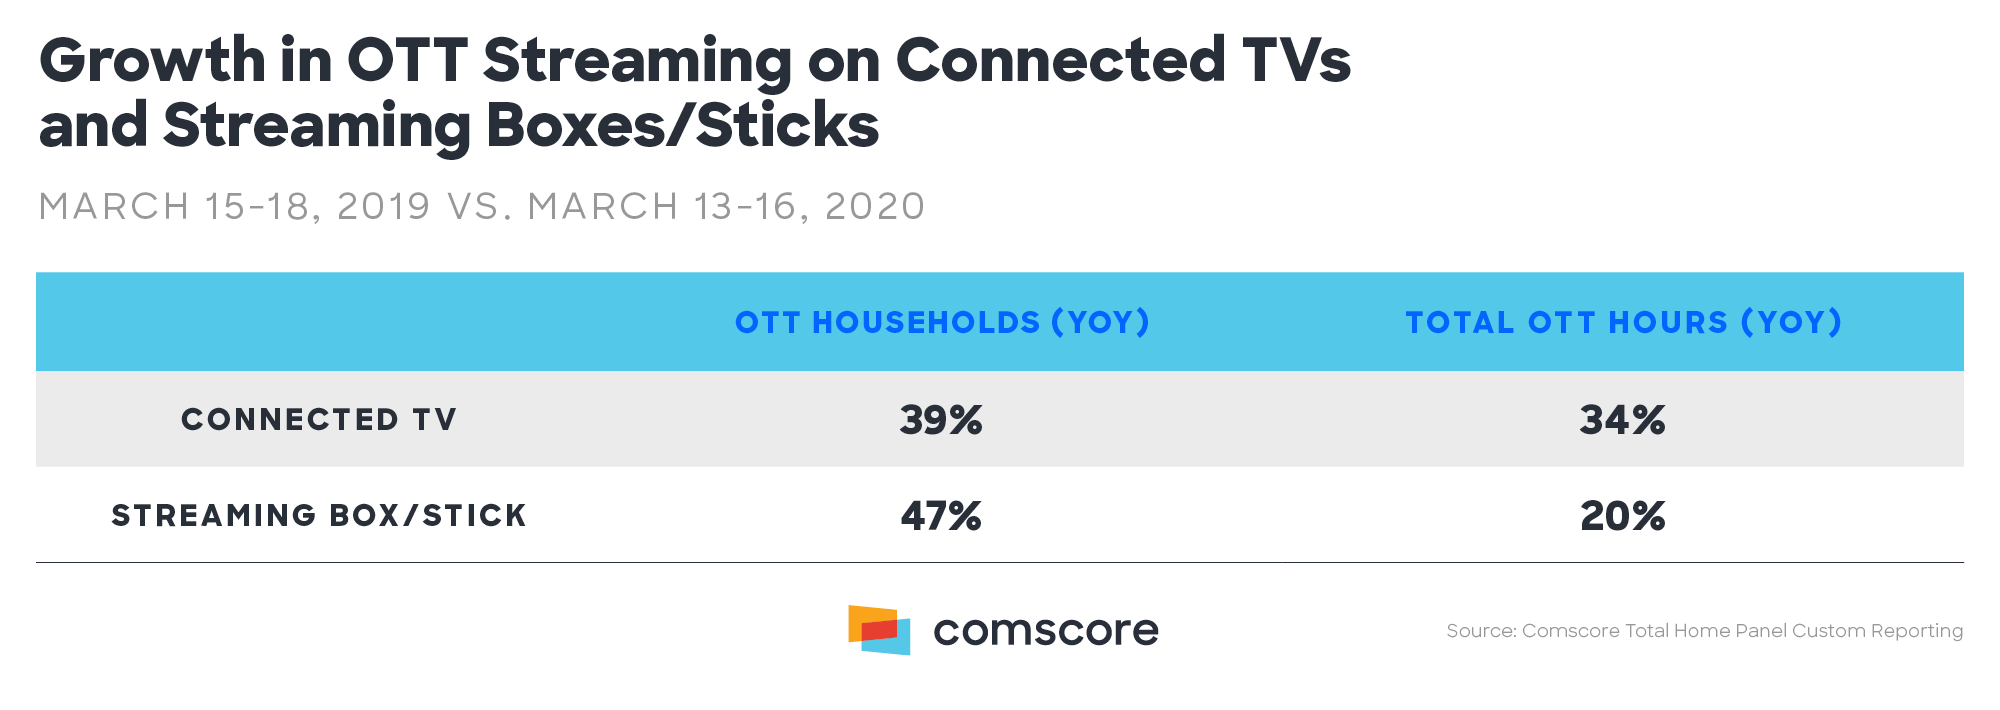 Coronavirus - Growth in Connected TV and streaming boxes/sticks